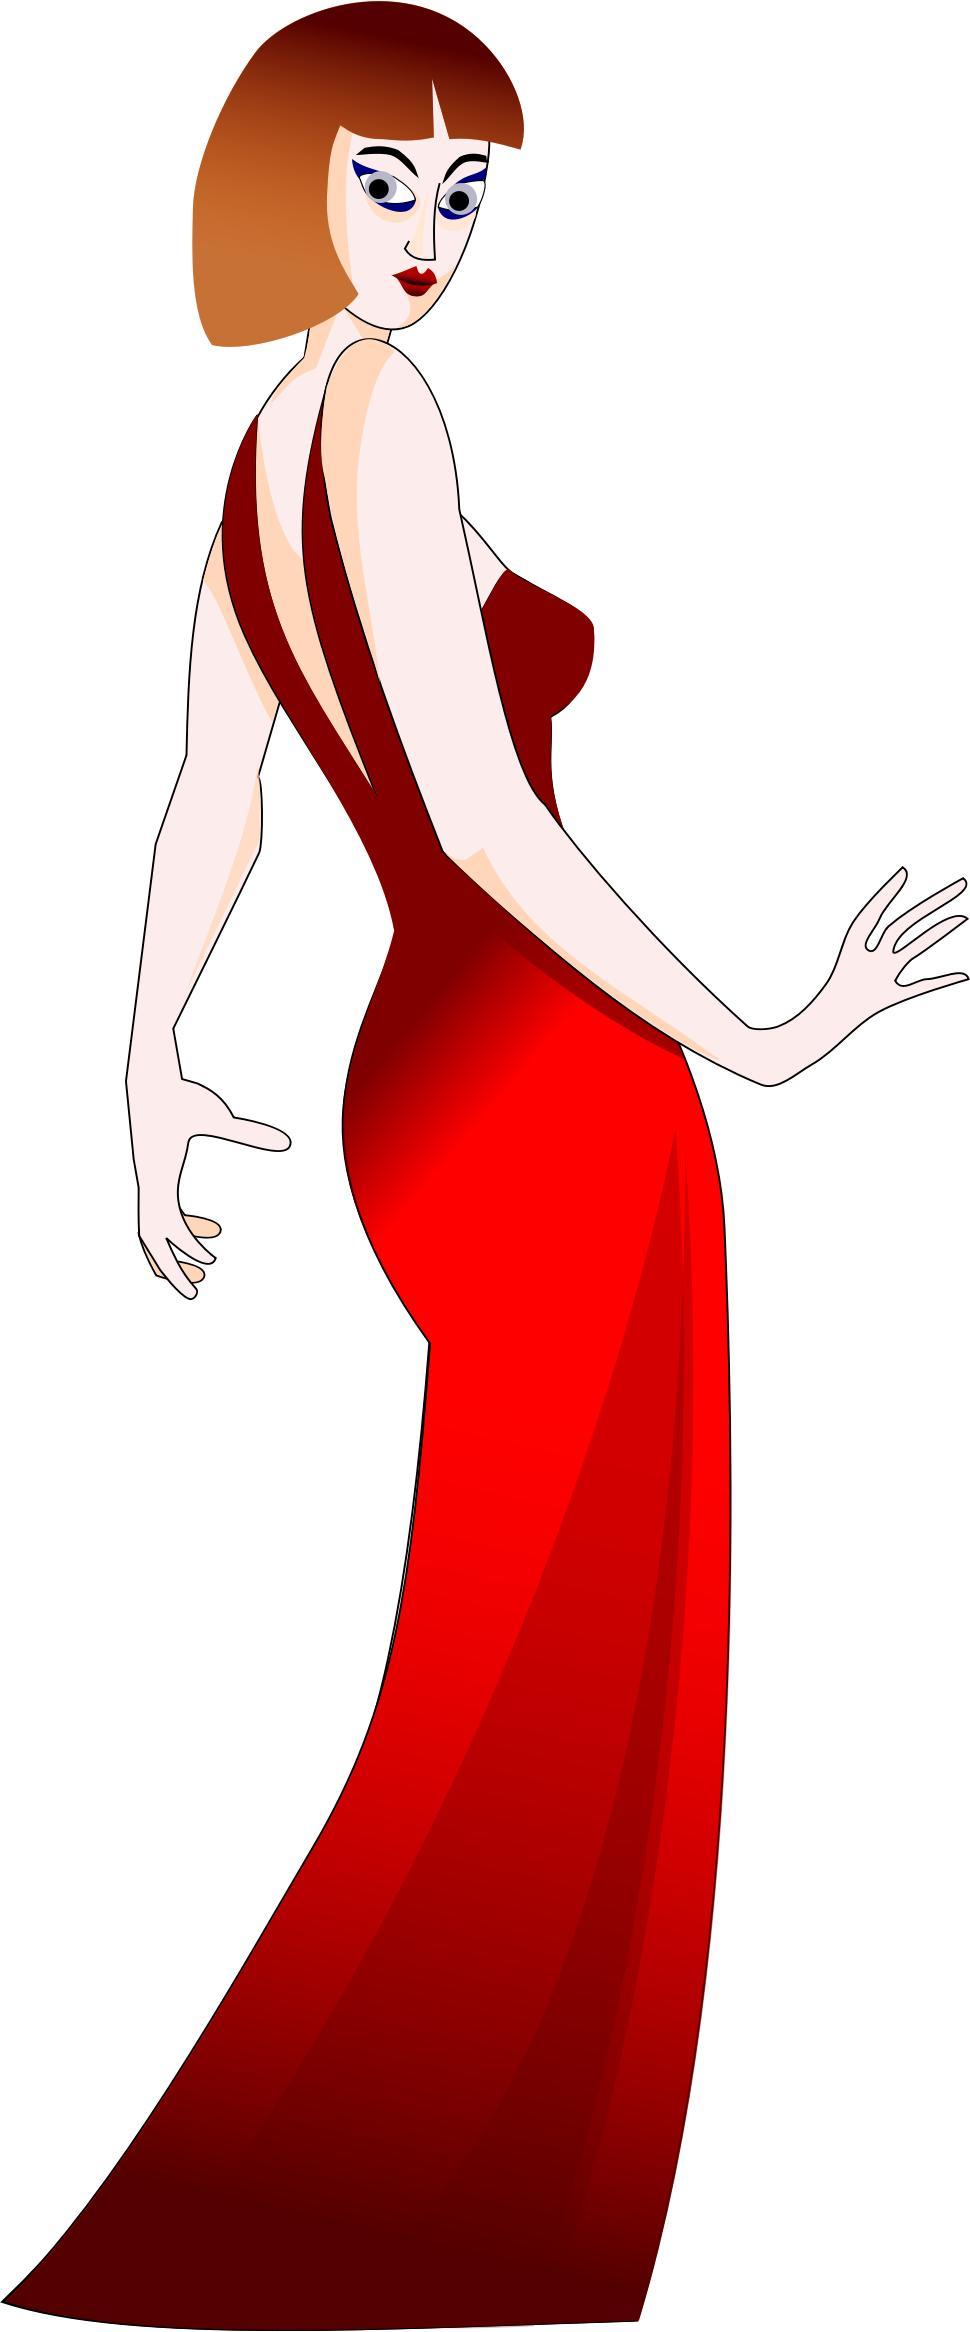 Woman In Red Dress png transparent